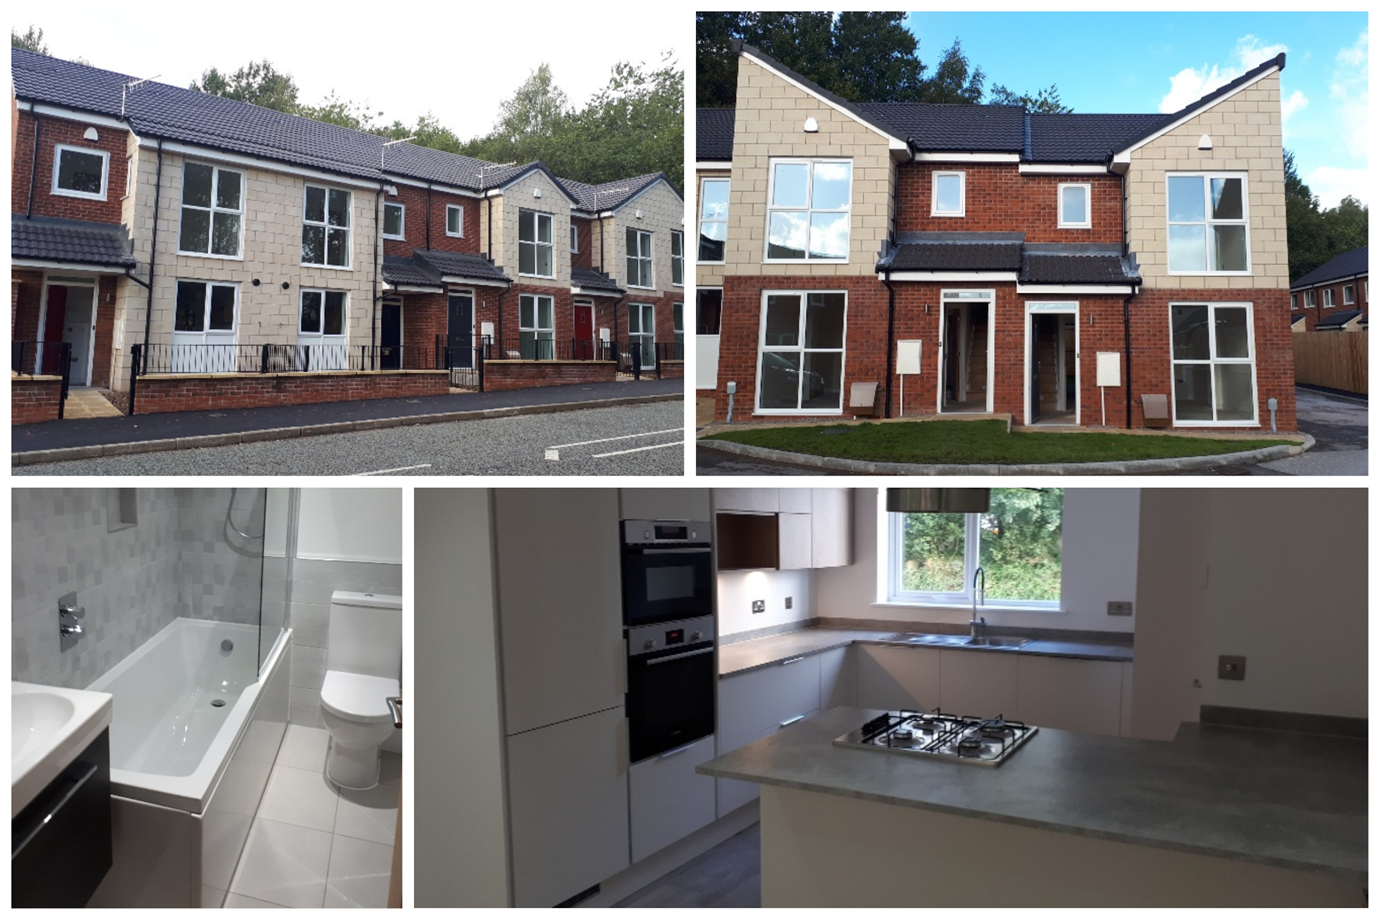 These ten family homes in Lees, Oldham are an 'off the shelf' purchase from a housing developer, and will enable us to provide much-needed homes to local people.